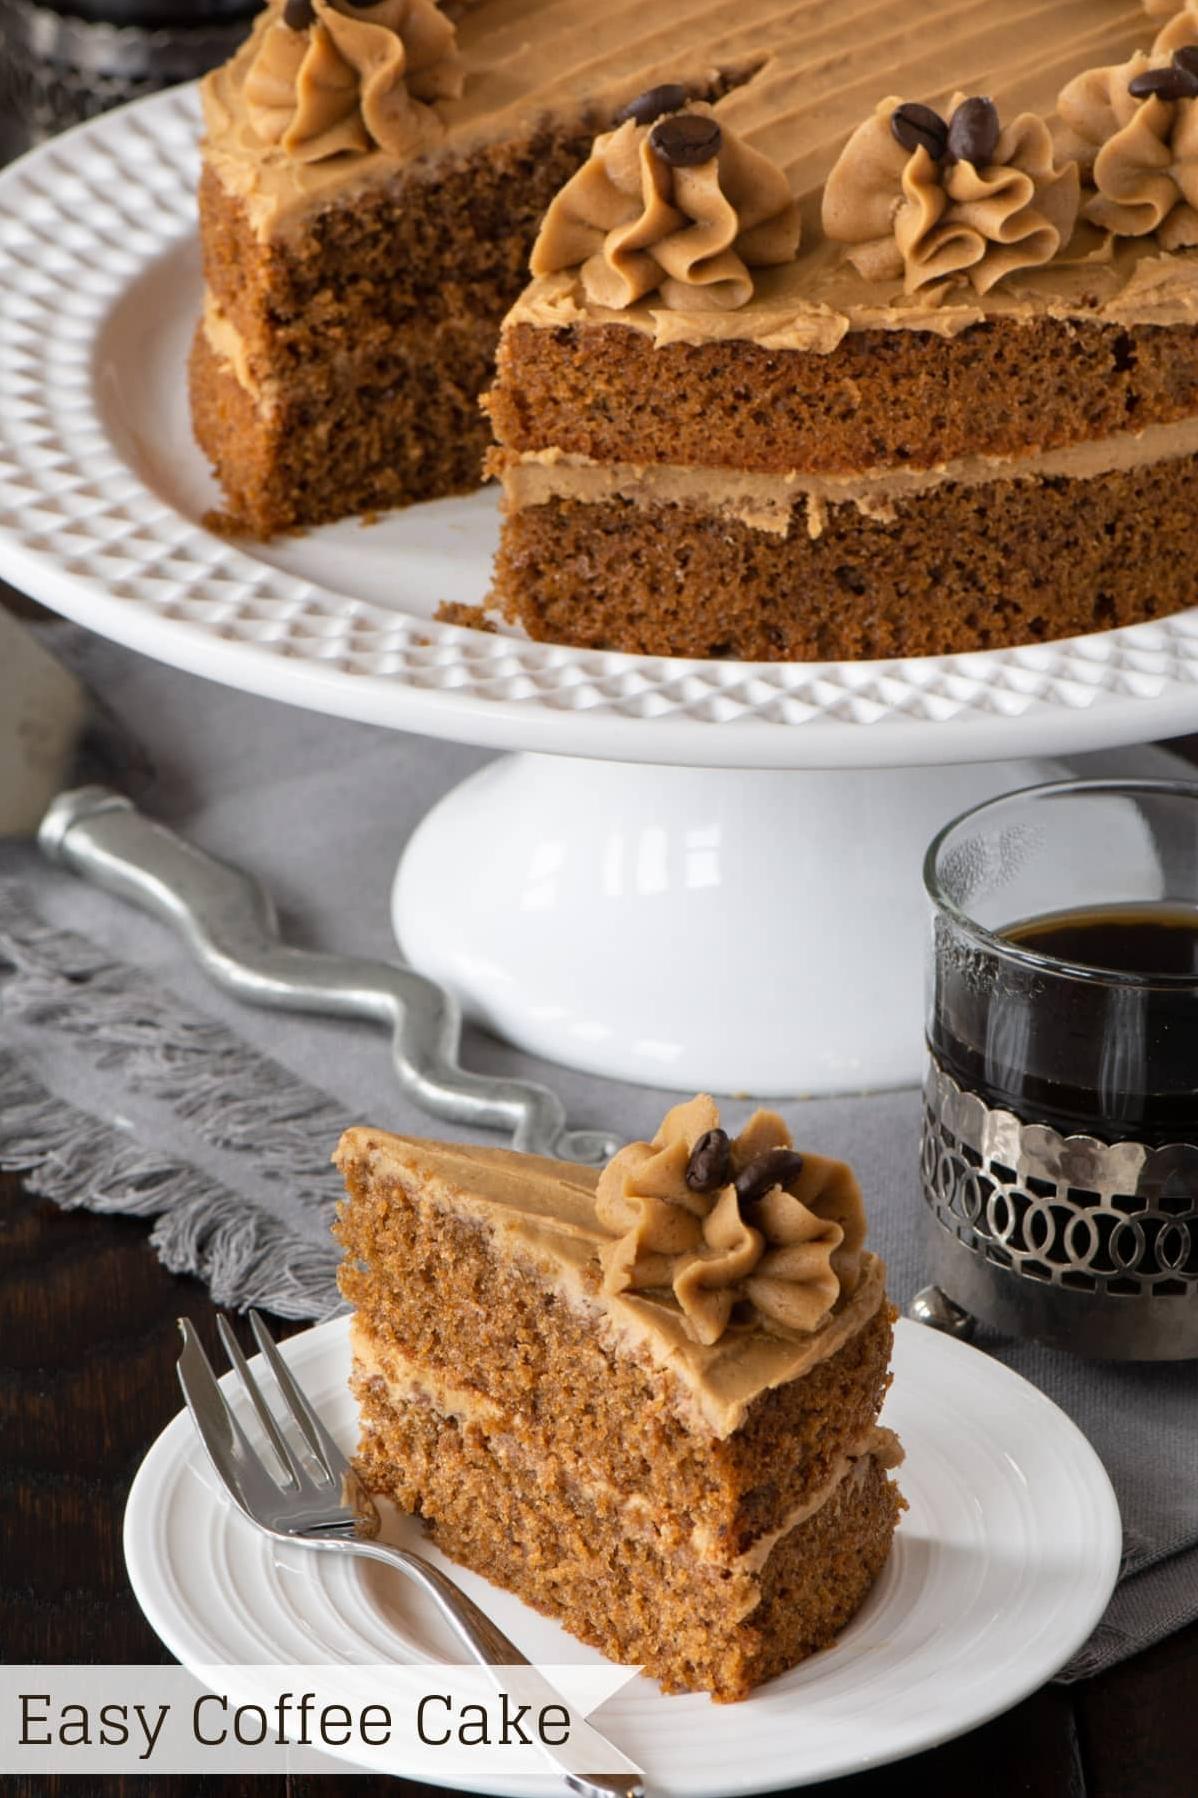  Satisfy your coffee cravings with this delightful cake